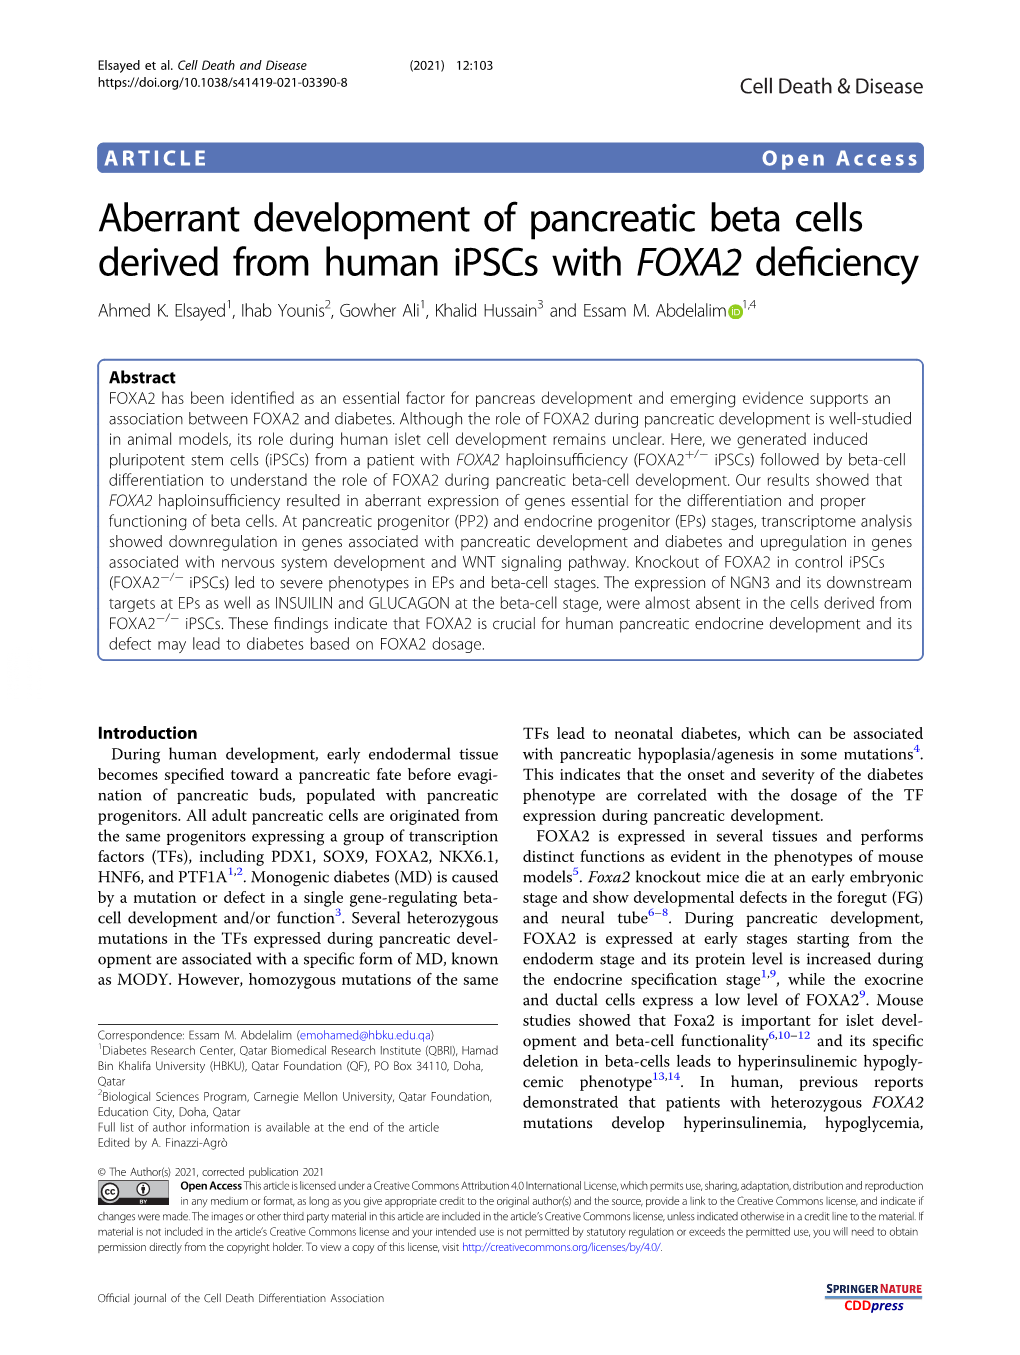 Aberrant Development of Pancreatic Beta Cells Derived from Human Ipscs with FOXA2 Deﬁciency Ahmed K